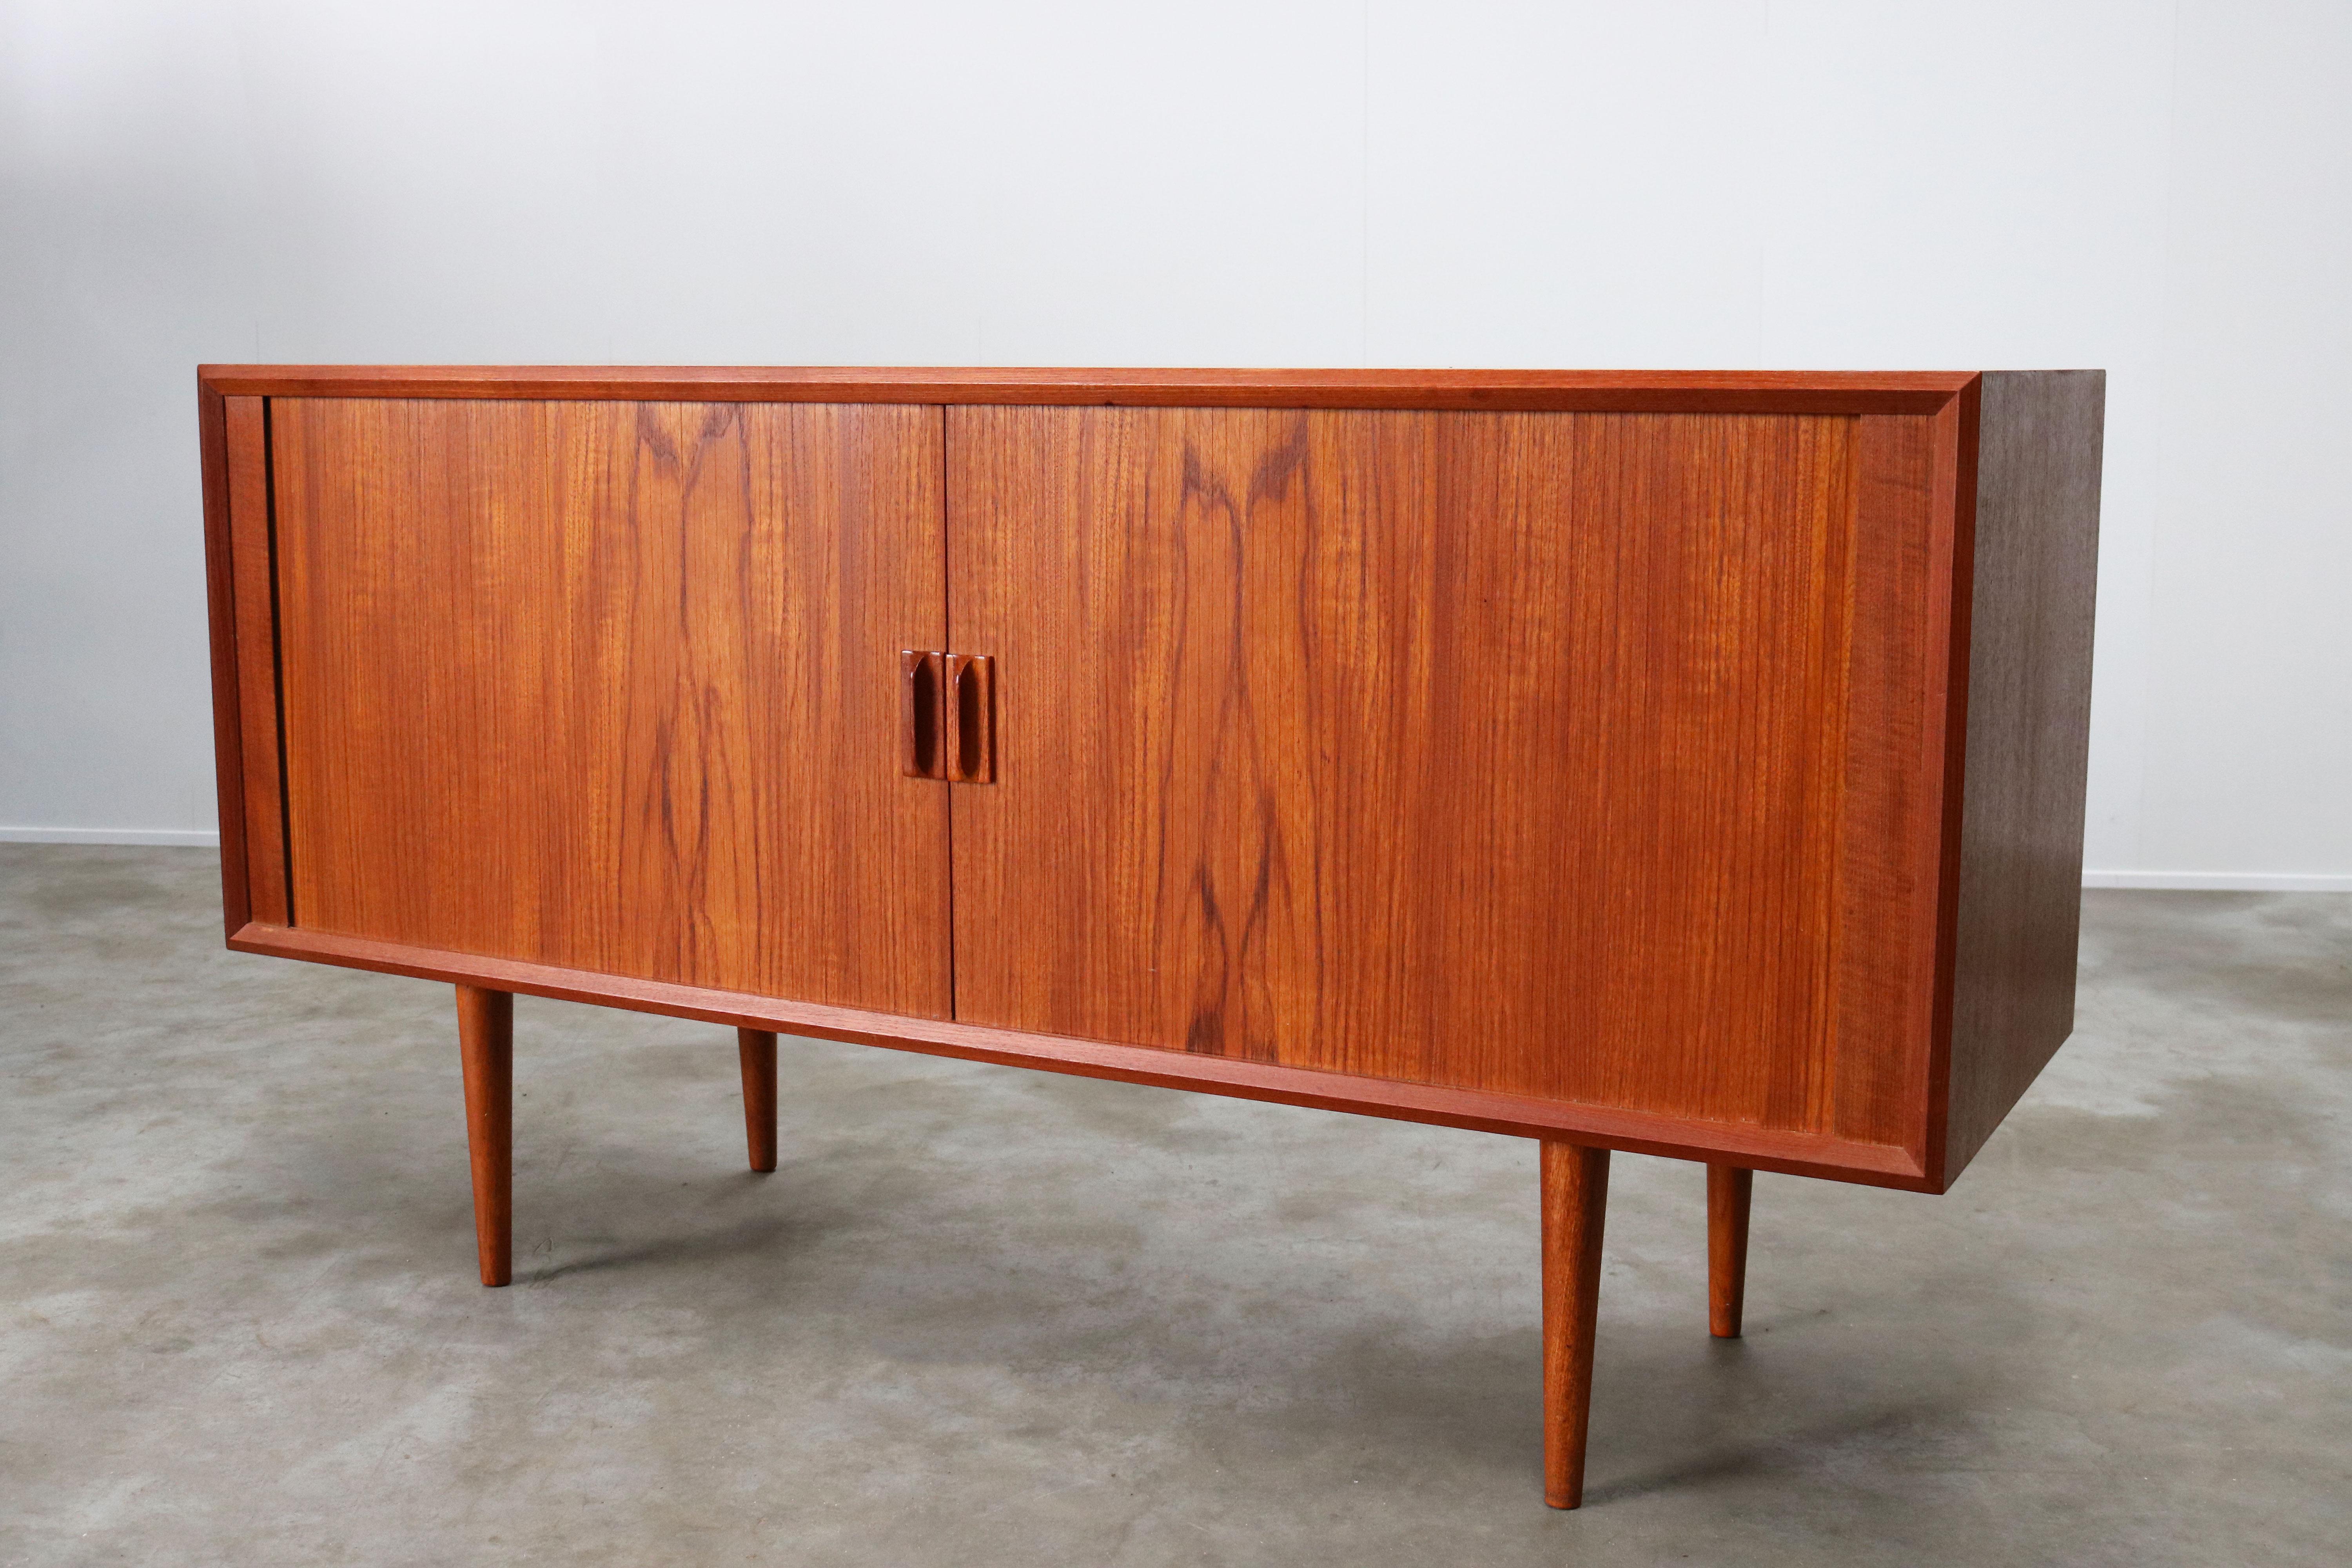 Small Rare Danish Sideboard / Credenza by Svend Aage Madsen for Faarup 1950 Teak 13